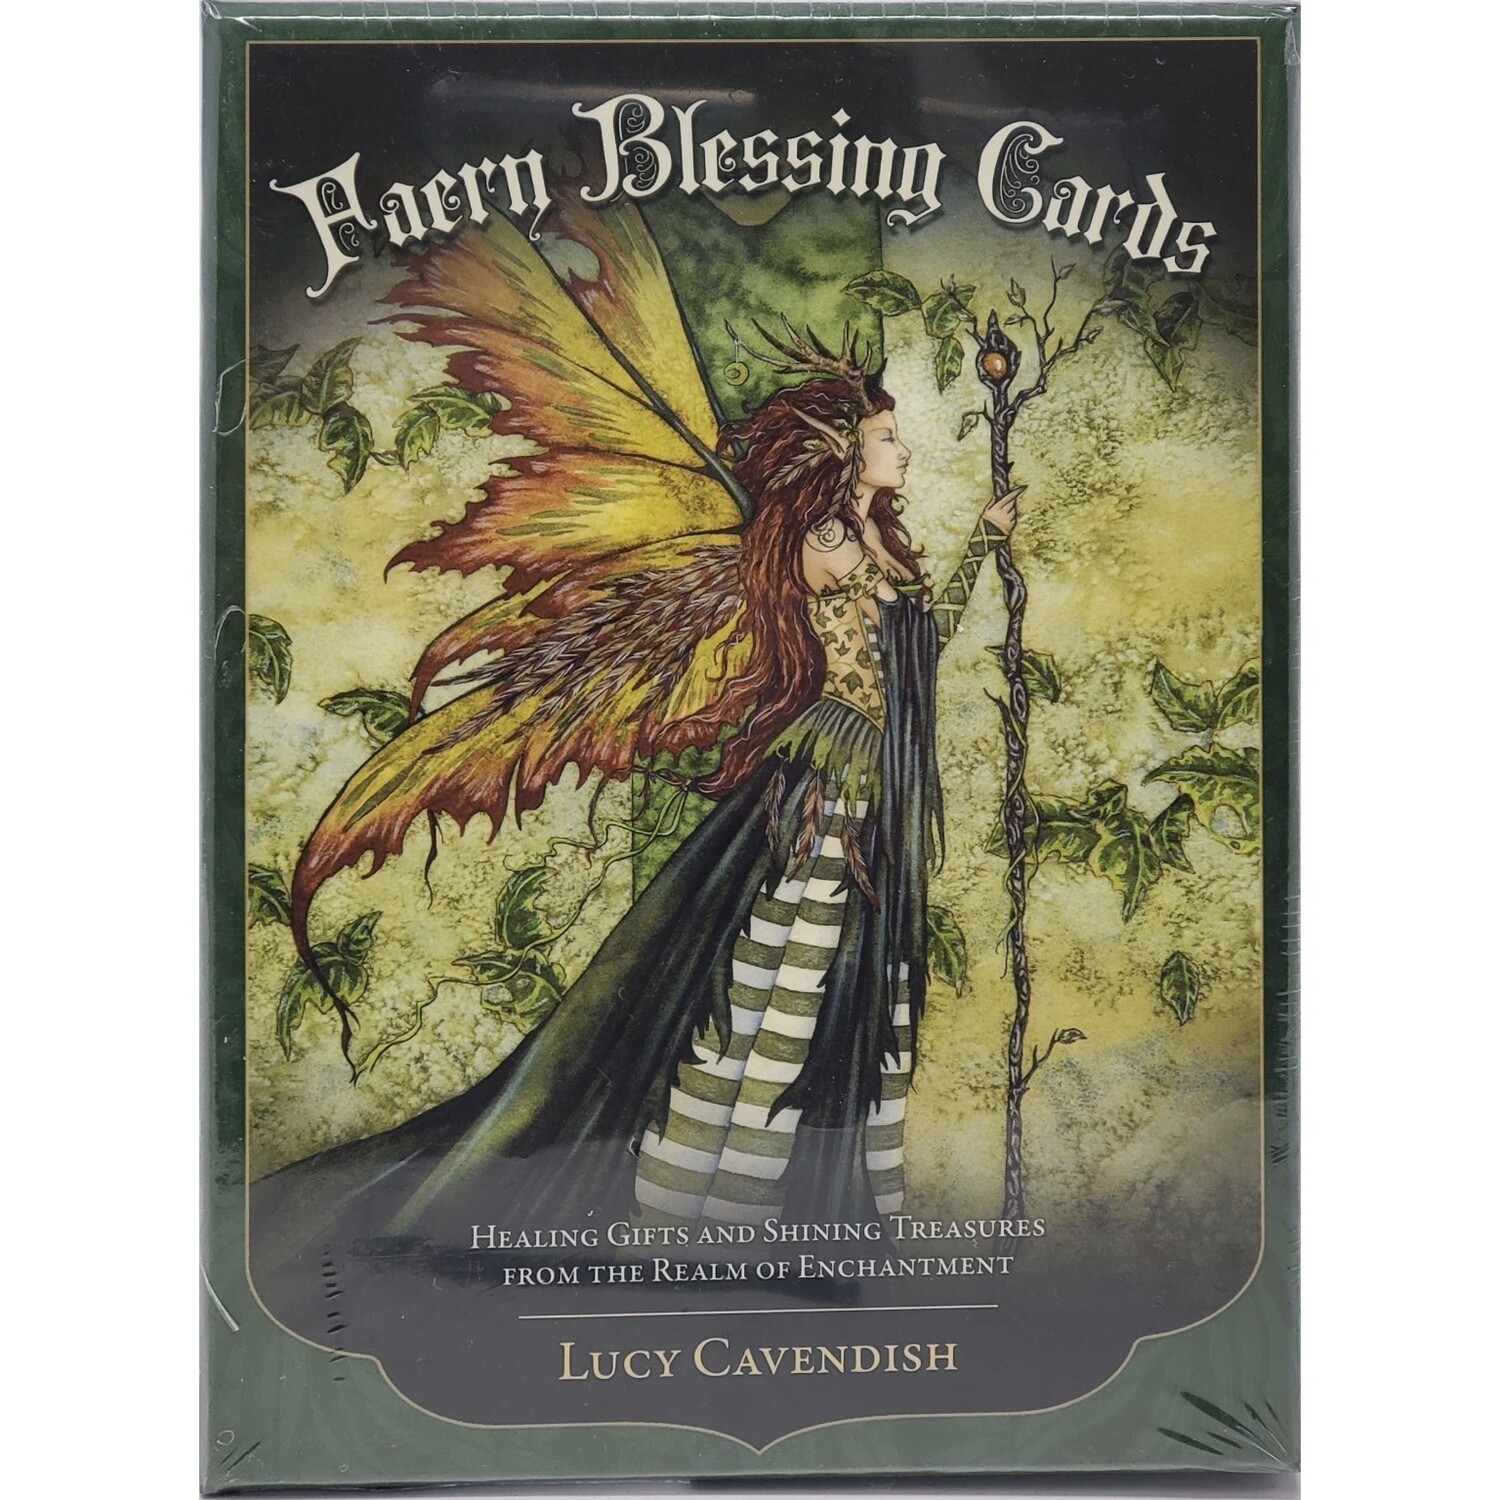 FAERY BLESSING CARDS